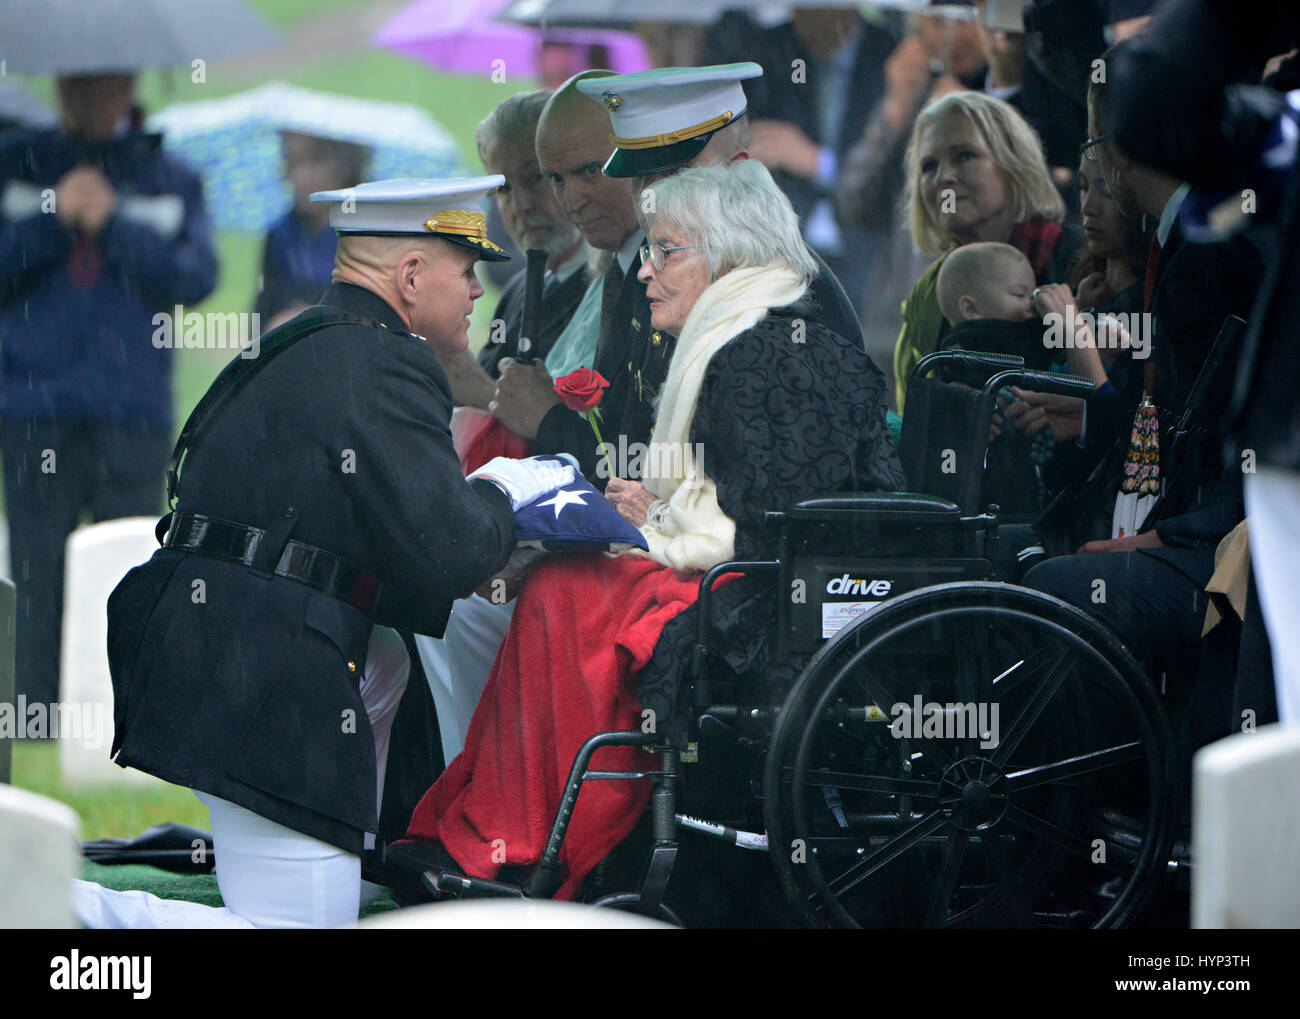 Arlington, Virginia, USA. 6th Apr, 2017. Commandant of the Marine Corps Gen. Robert Neller, left, presents the American flag to Annie Glenn, widow of John Glenn, during the graveside service in Section 35 of Arlington National Cemetery April 6, 2017 in Arlington, Virginia. Glenn, the first American astronaut to orbit the Earth and later a United States senator, died at the age of 95 on December 8, 2016. Credit: Planetpix/Alamy Live News Stock Photo